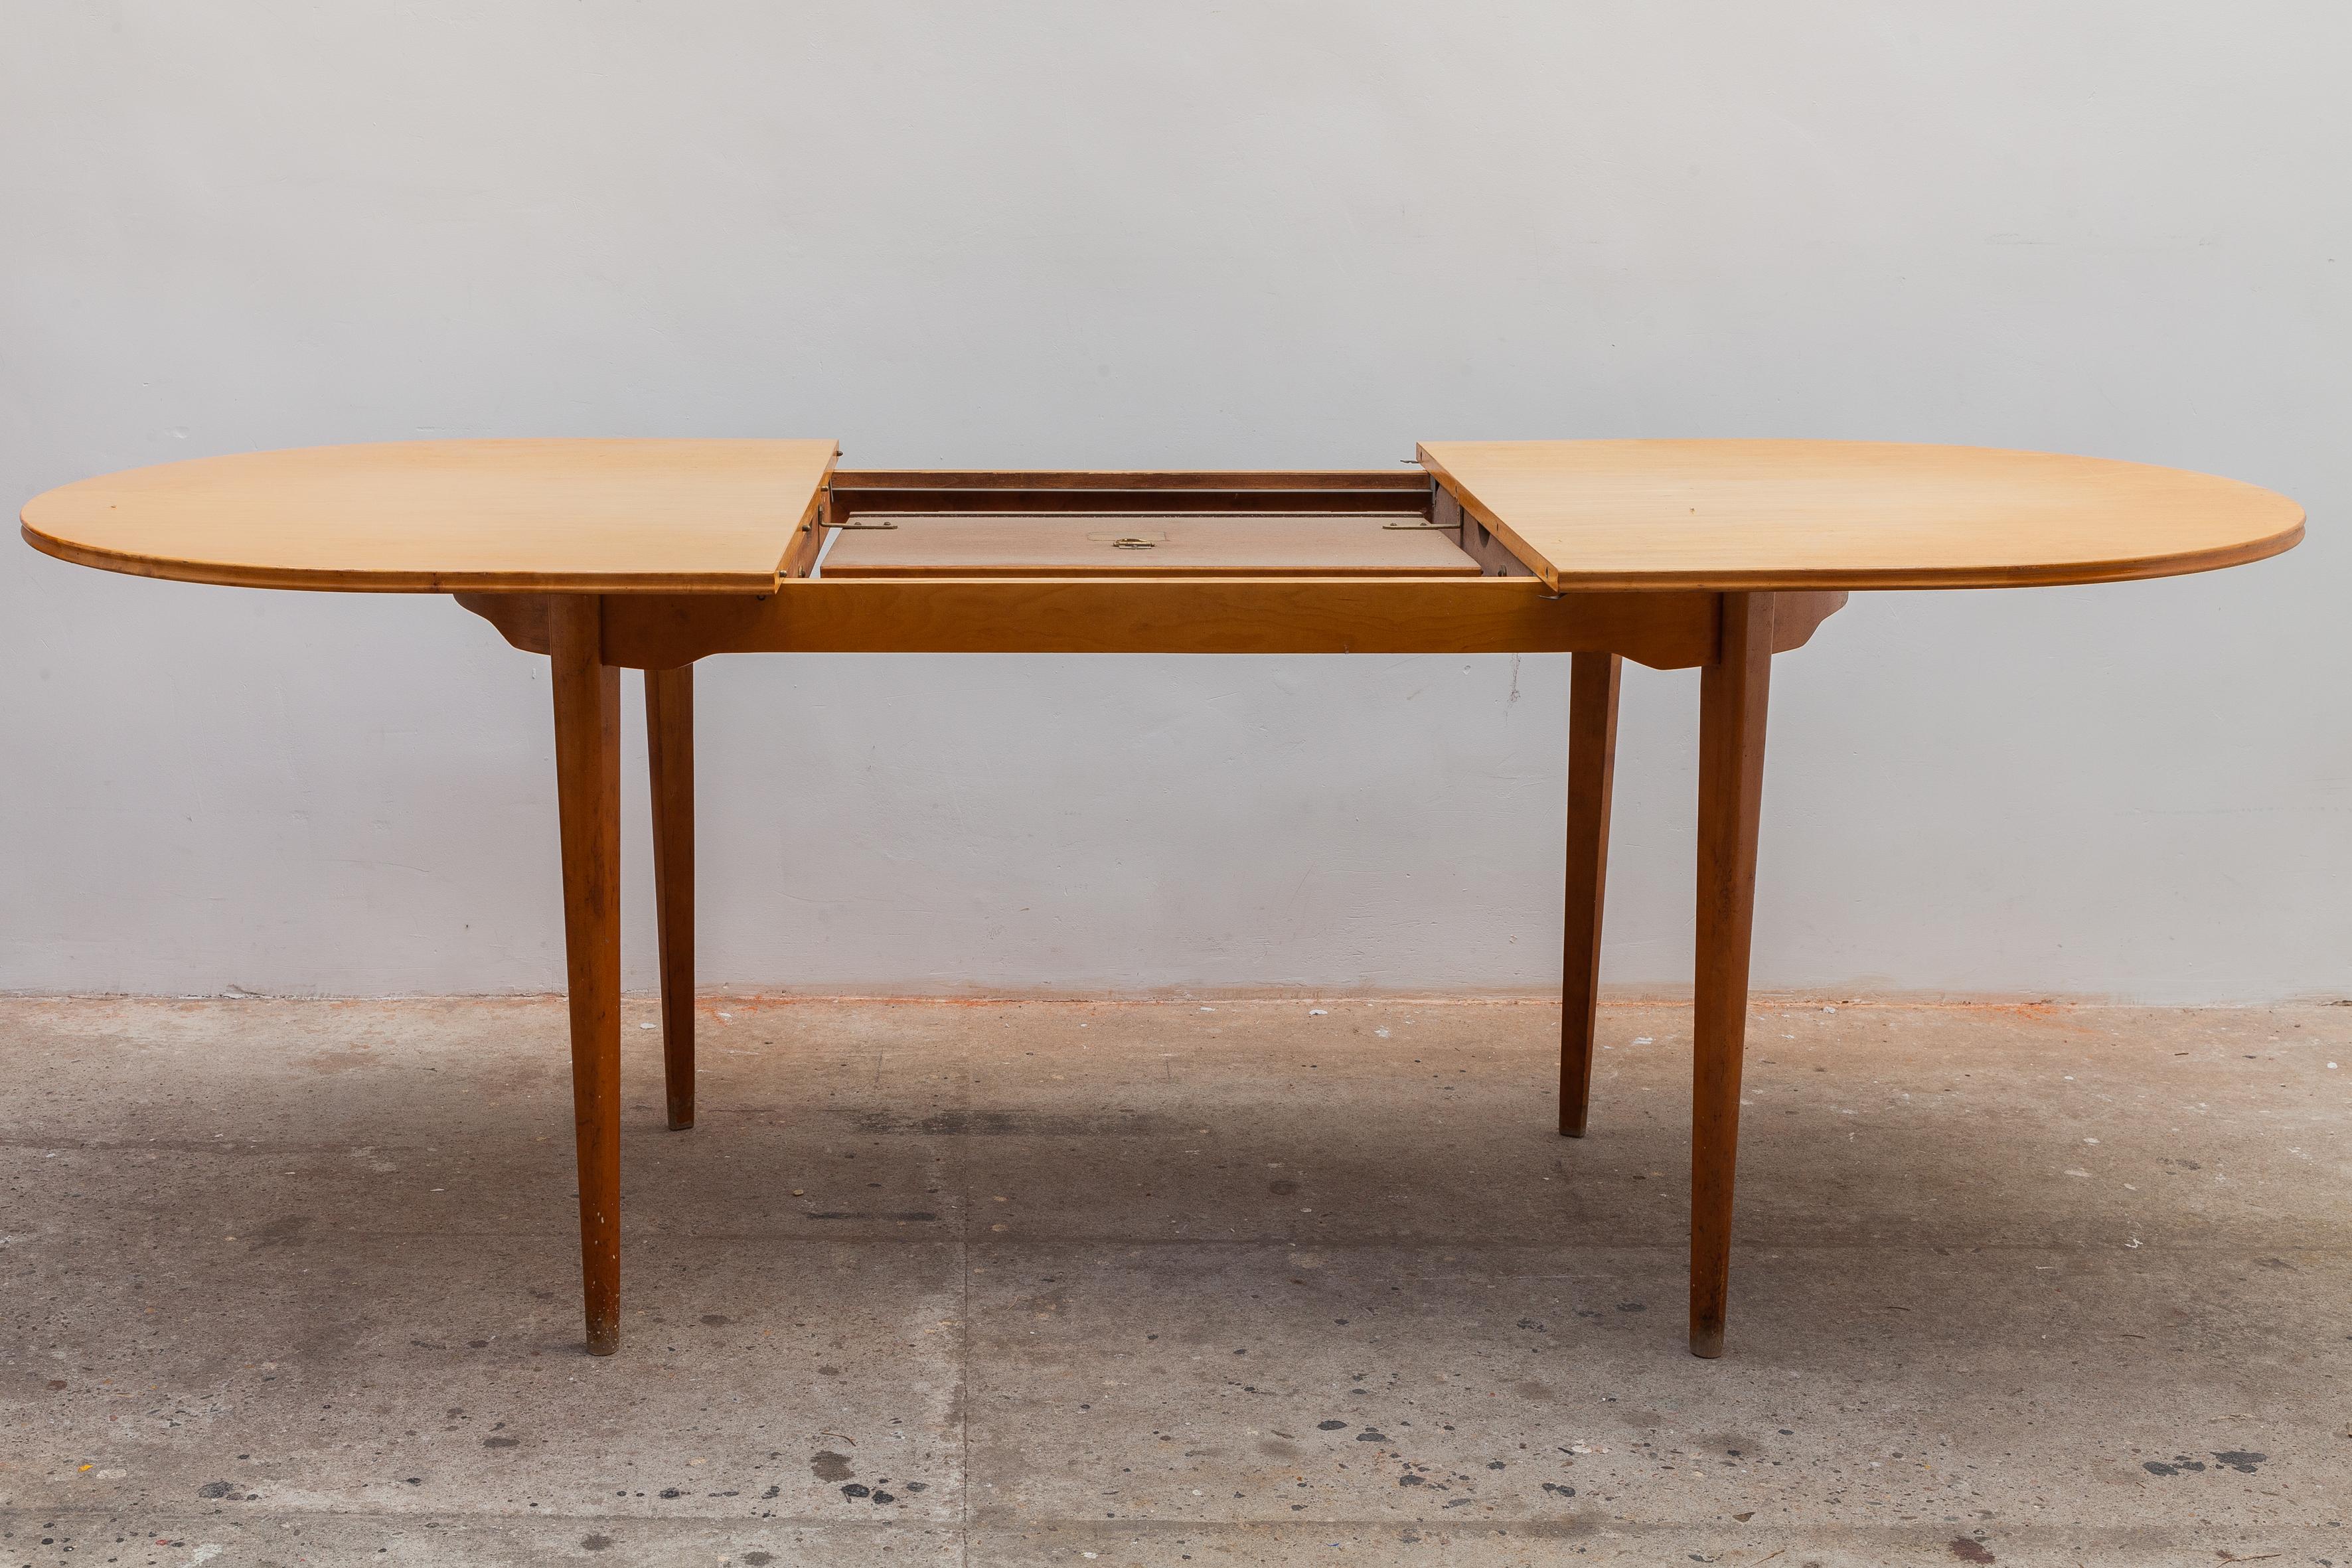 Hand-Crafted Mid-Century Modern Oval Satin Wood Dining Table, 1950s, Belgium